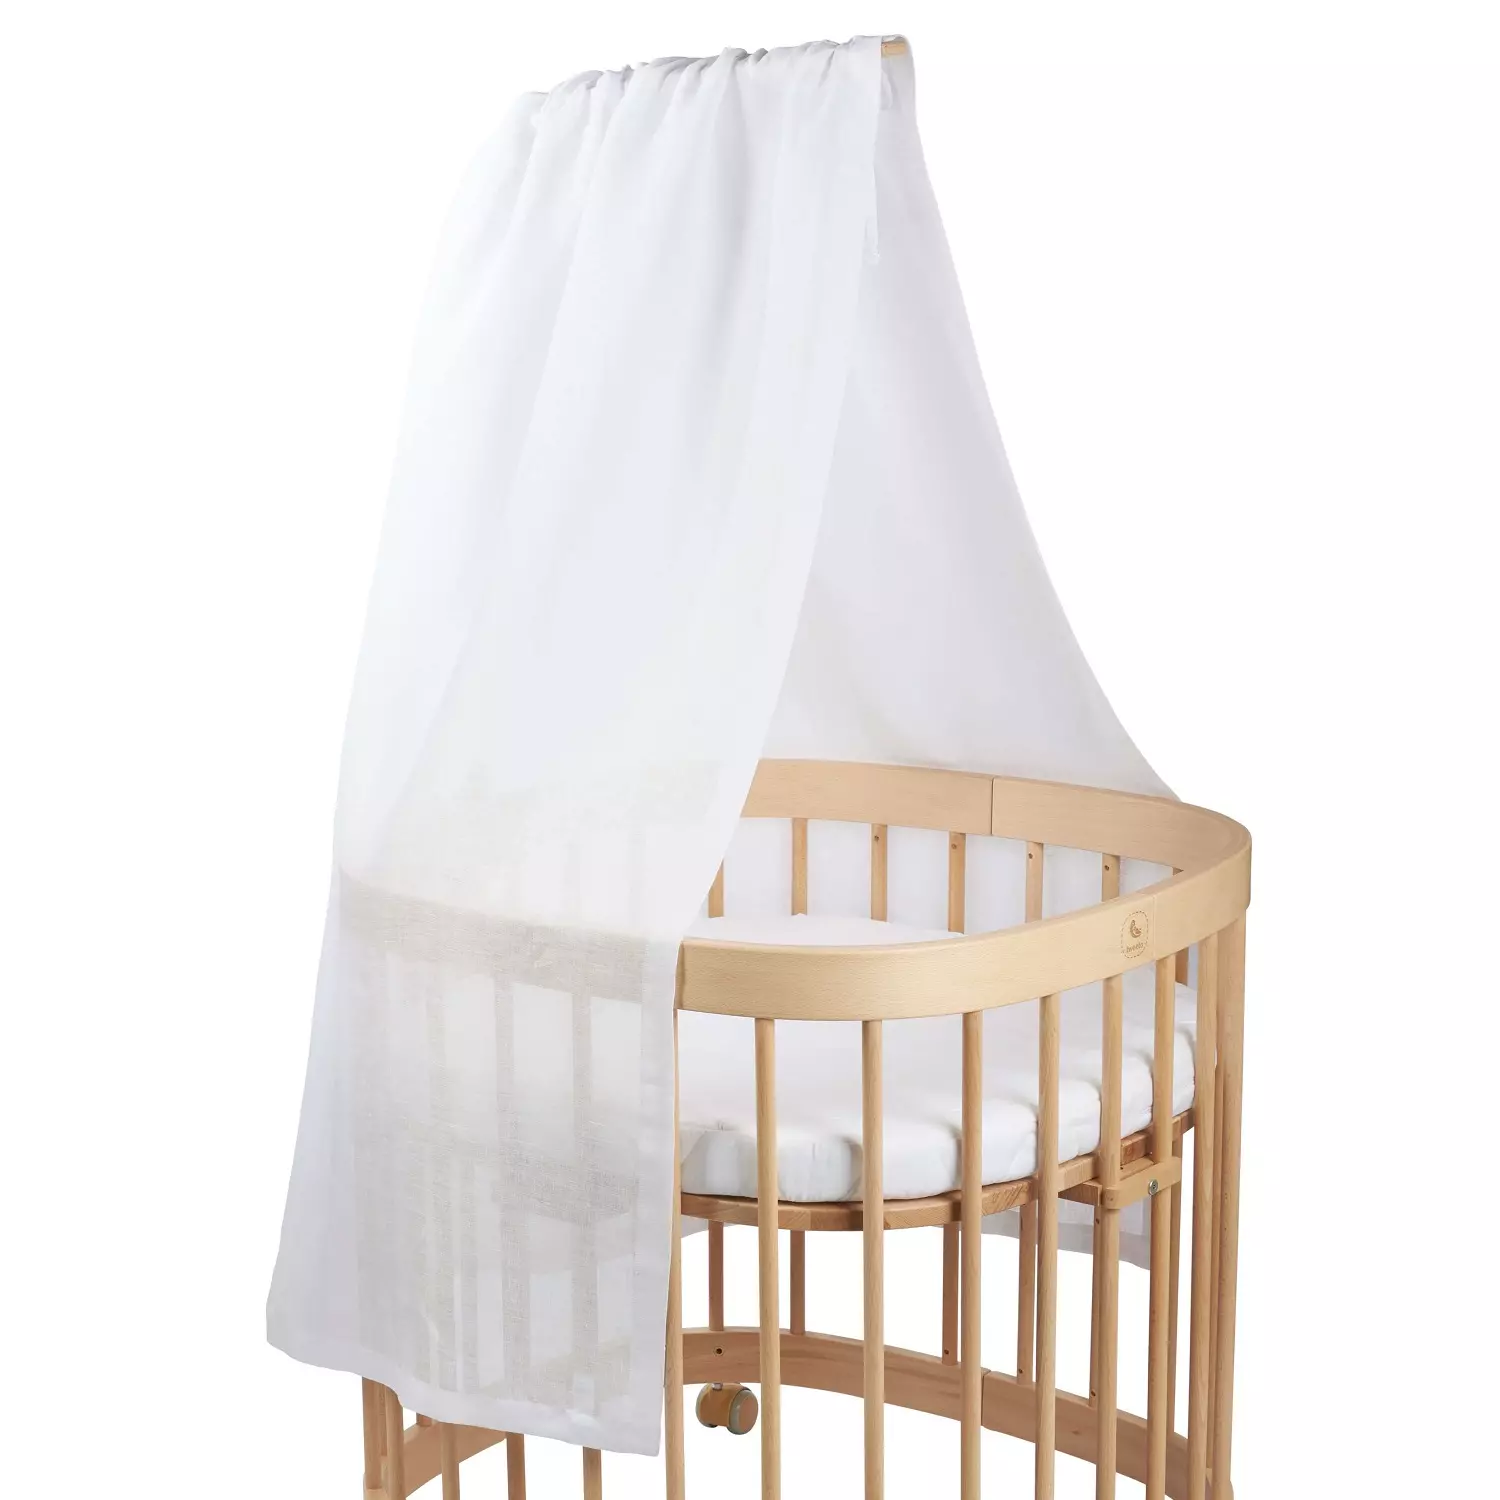 tweeto babybed canopy - 100% cotton - white